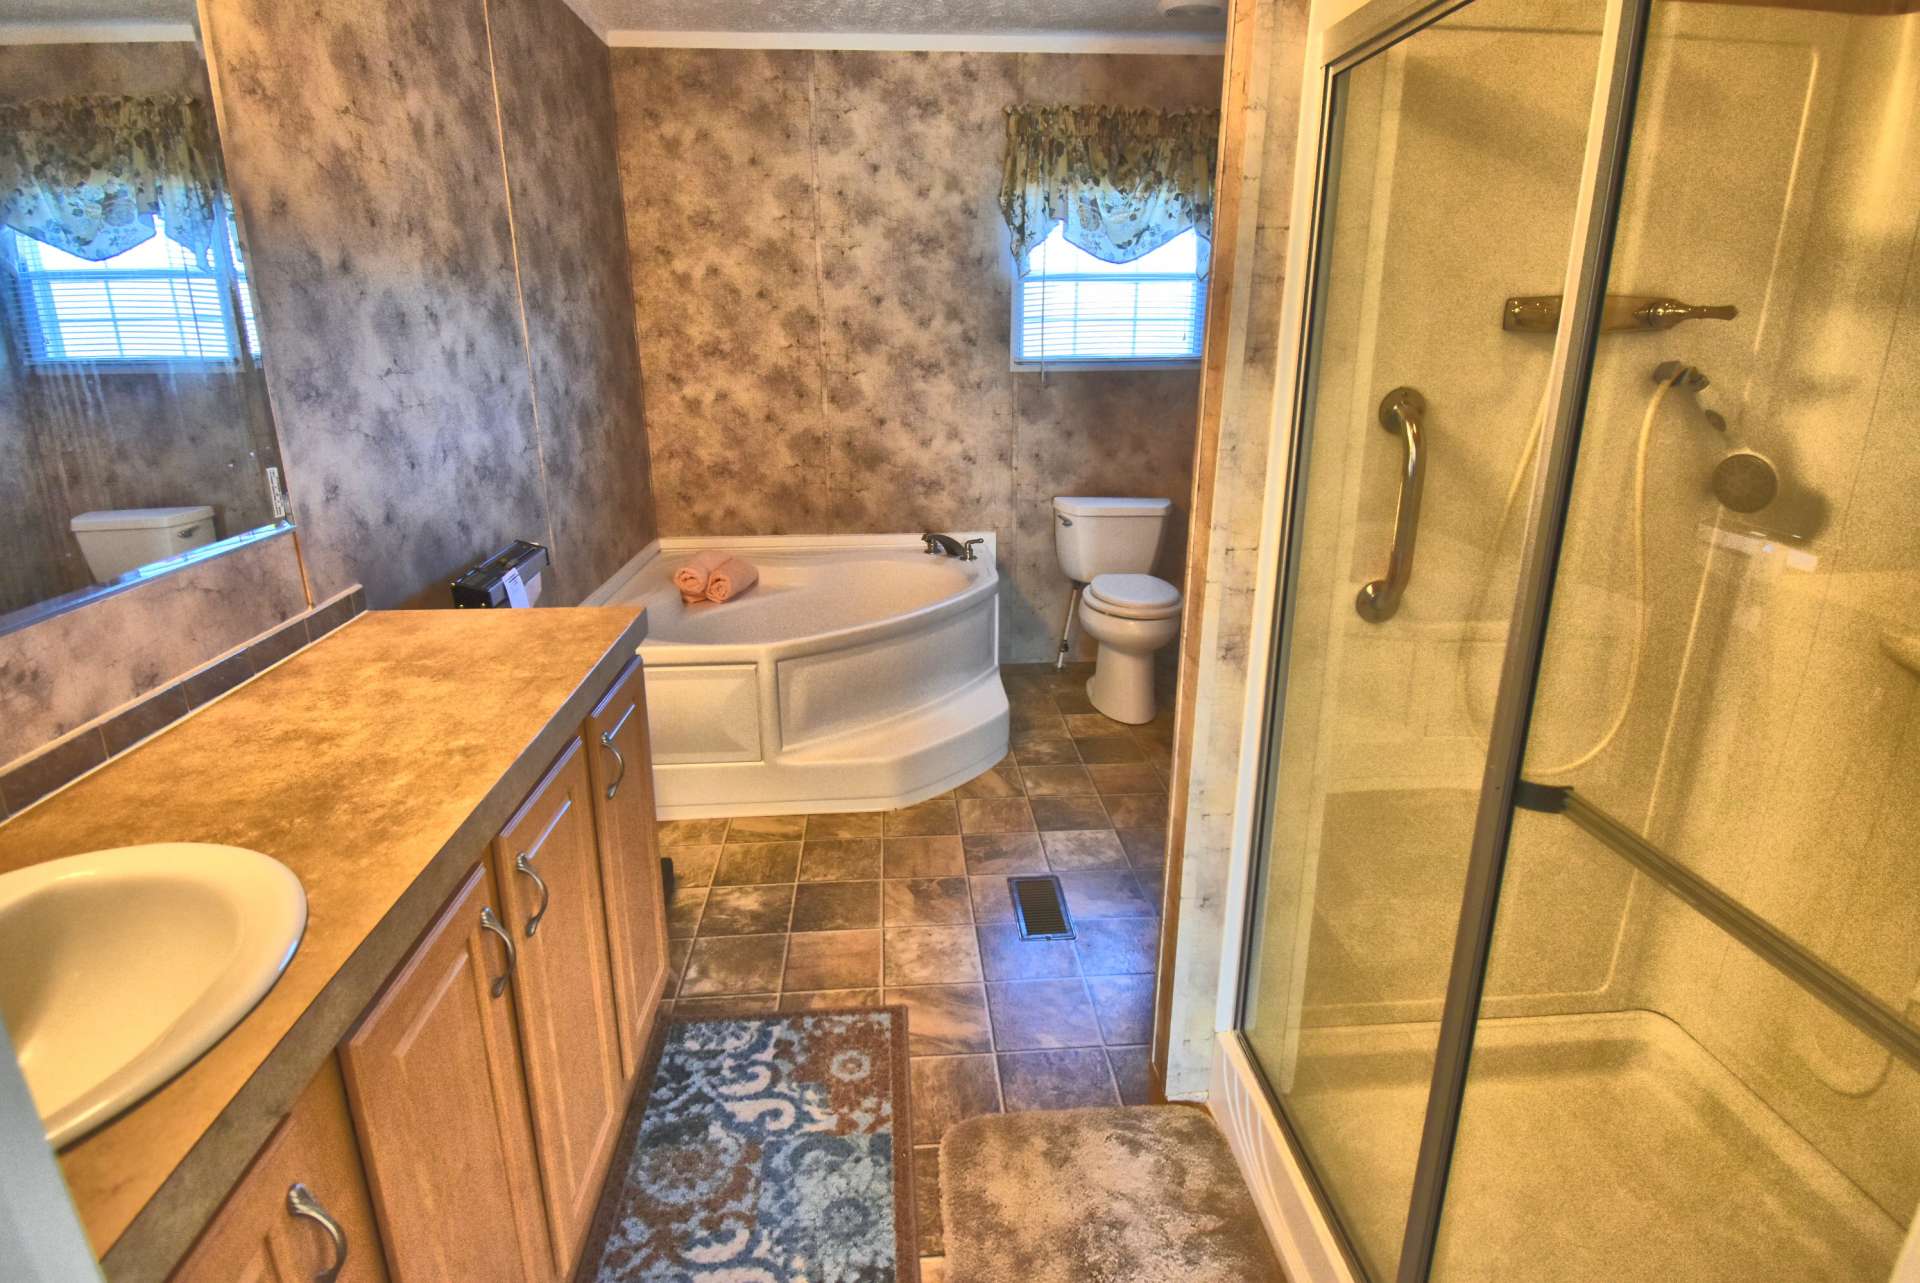 The master bath offers s large garden tub and separate walk-in shower.